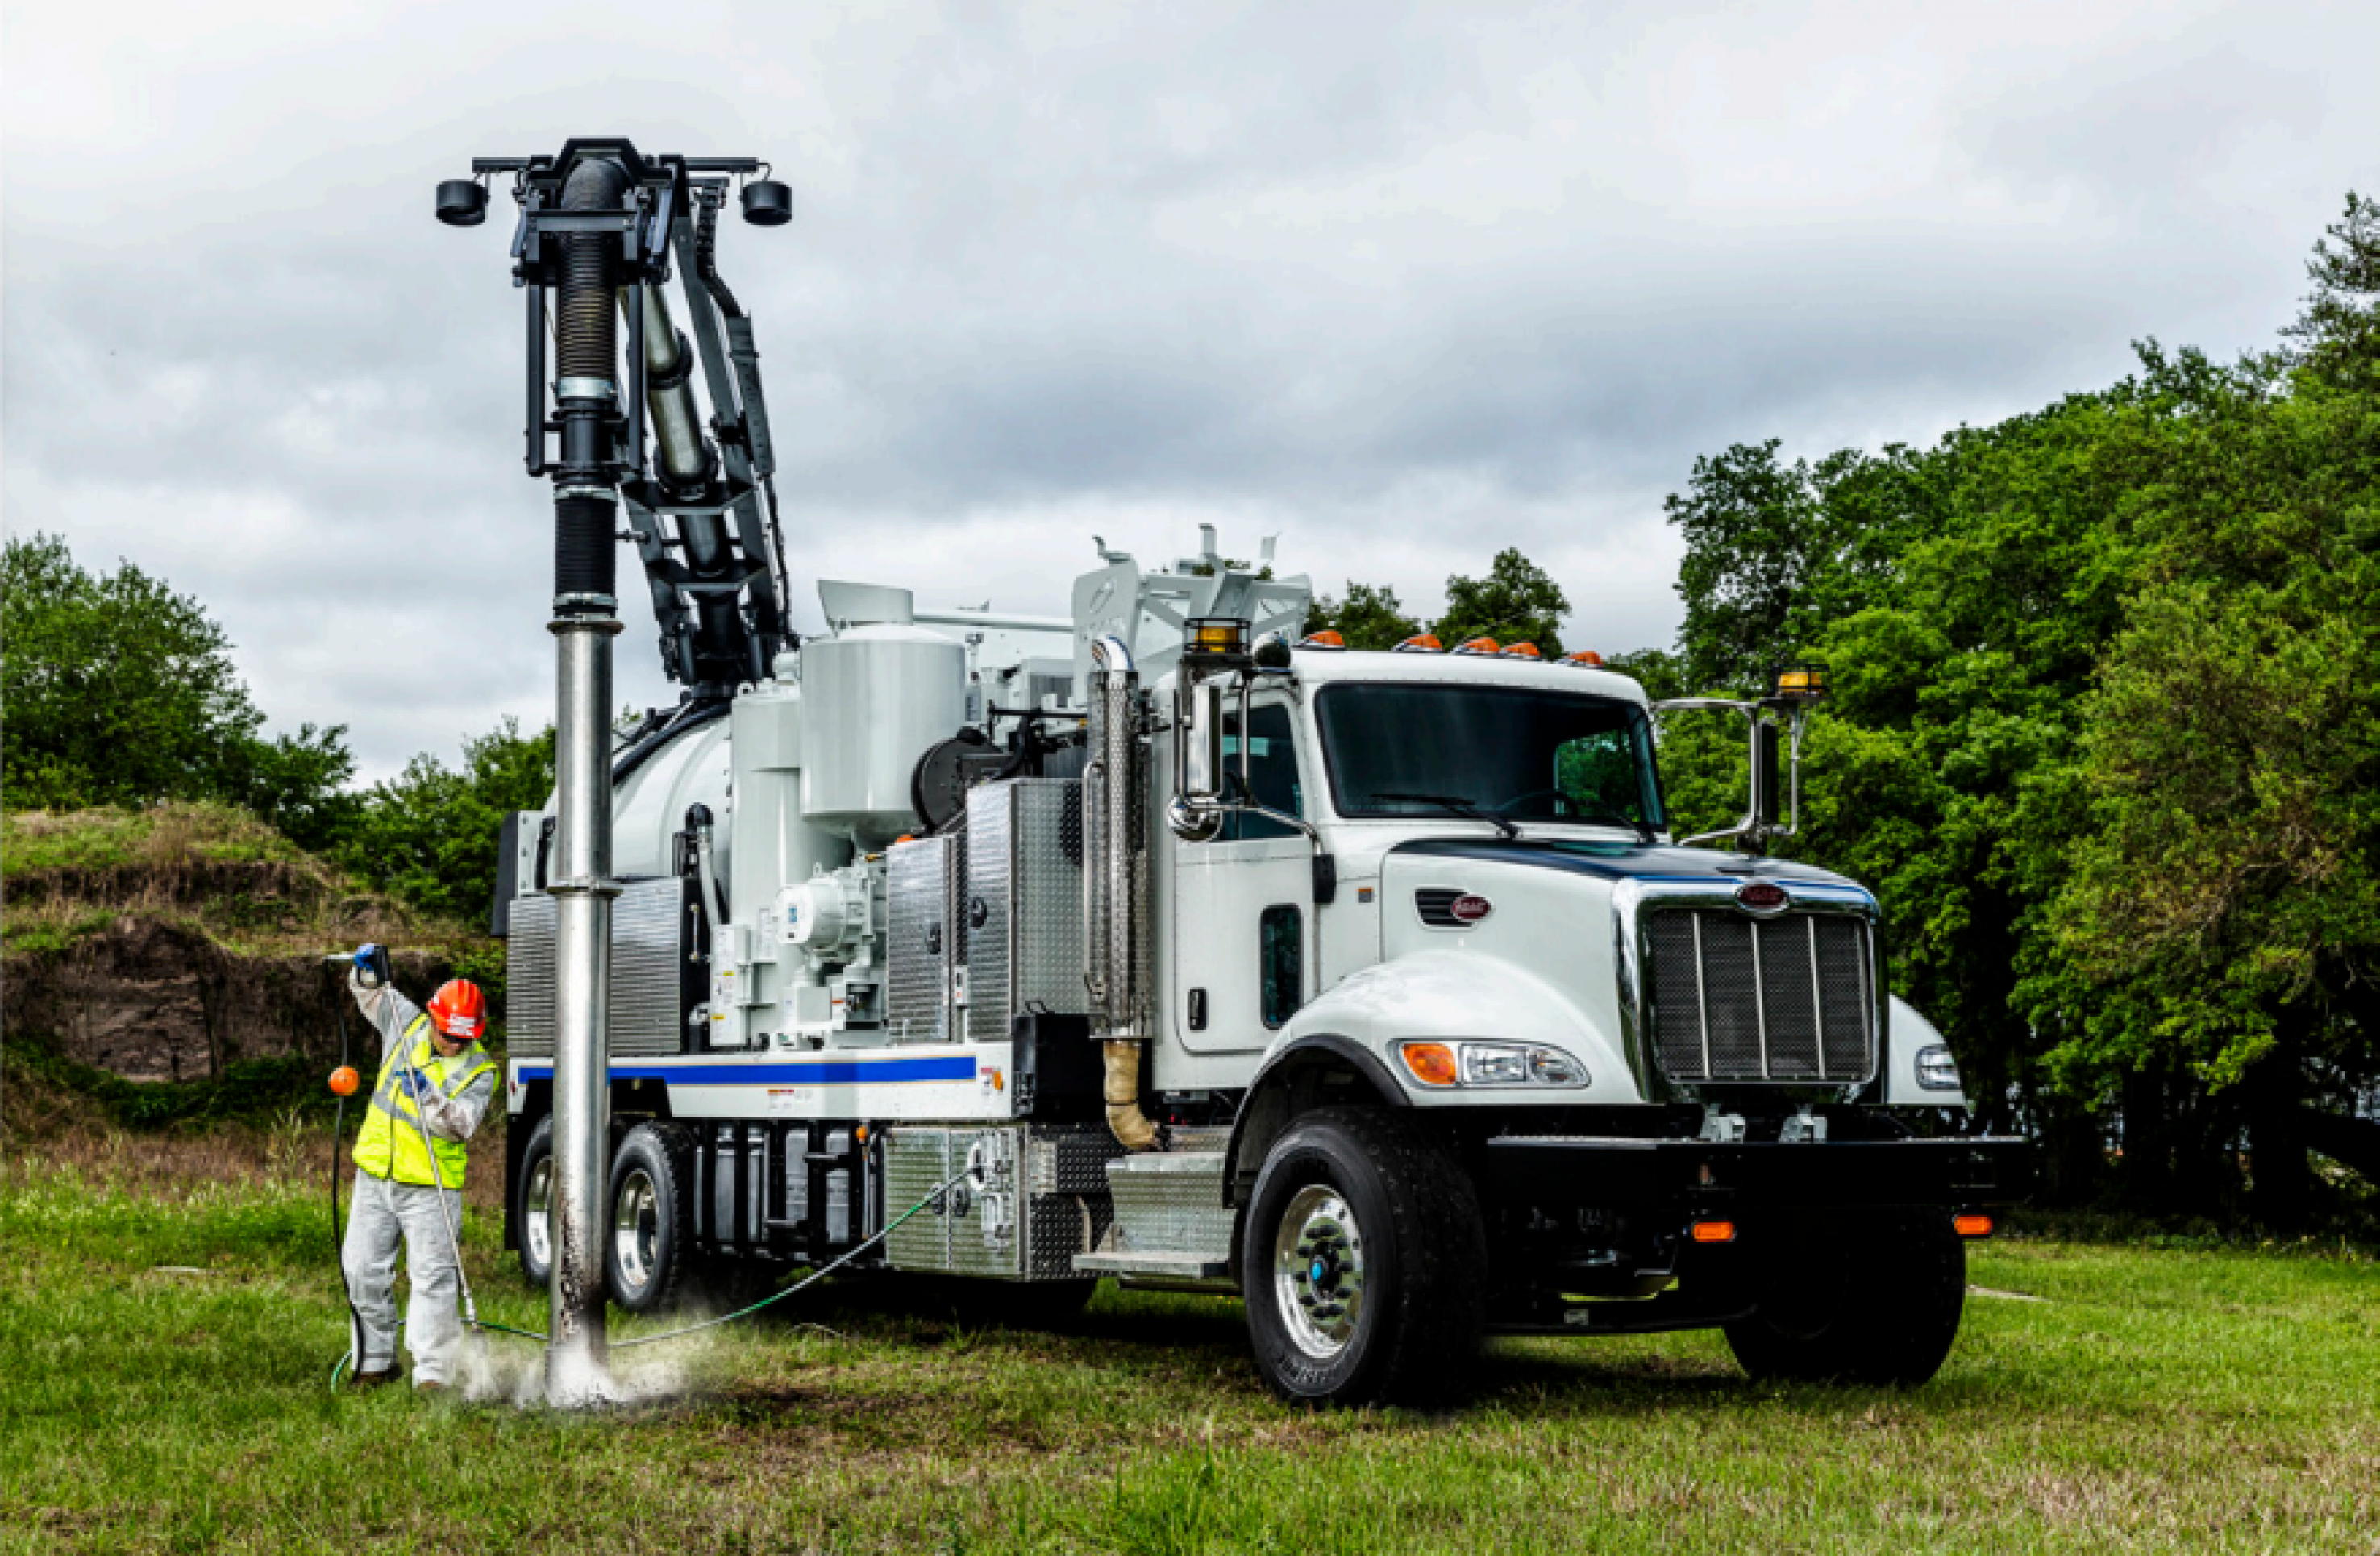 Image of a vac truck